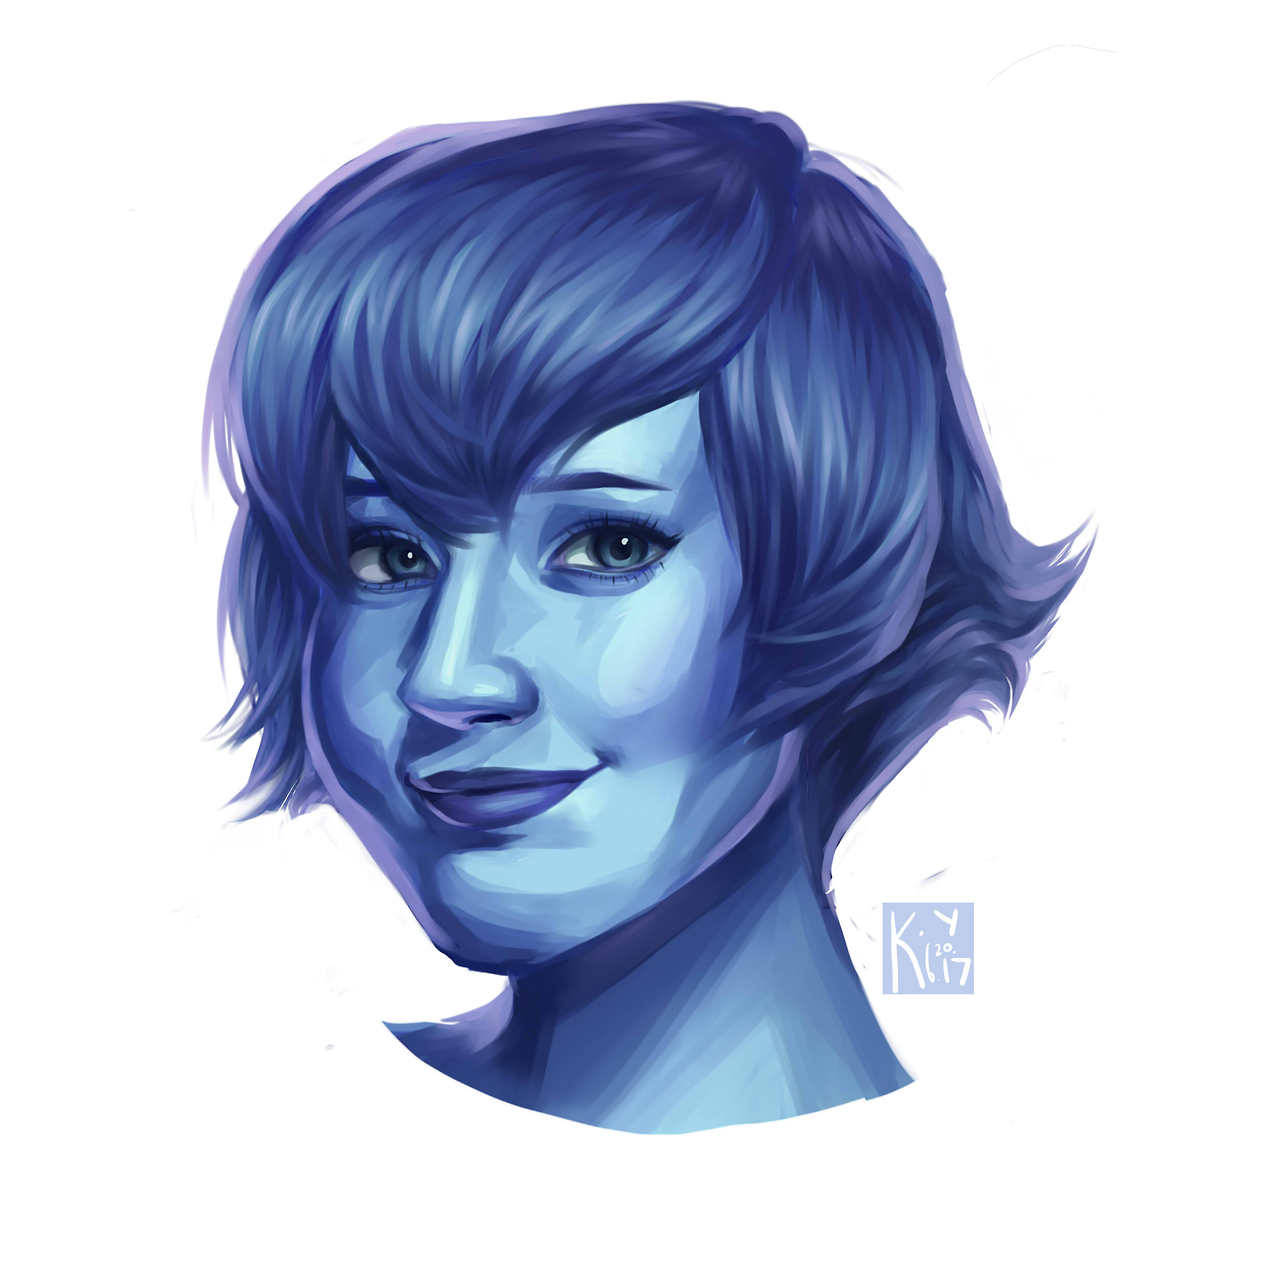 Never posted this portrait so here’s a smiley Lapis!!